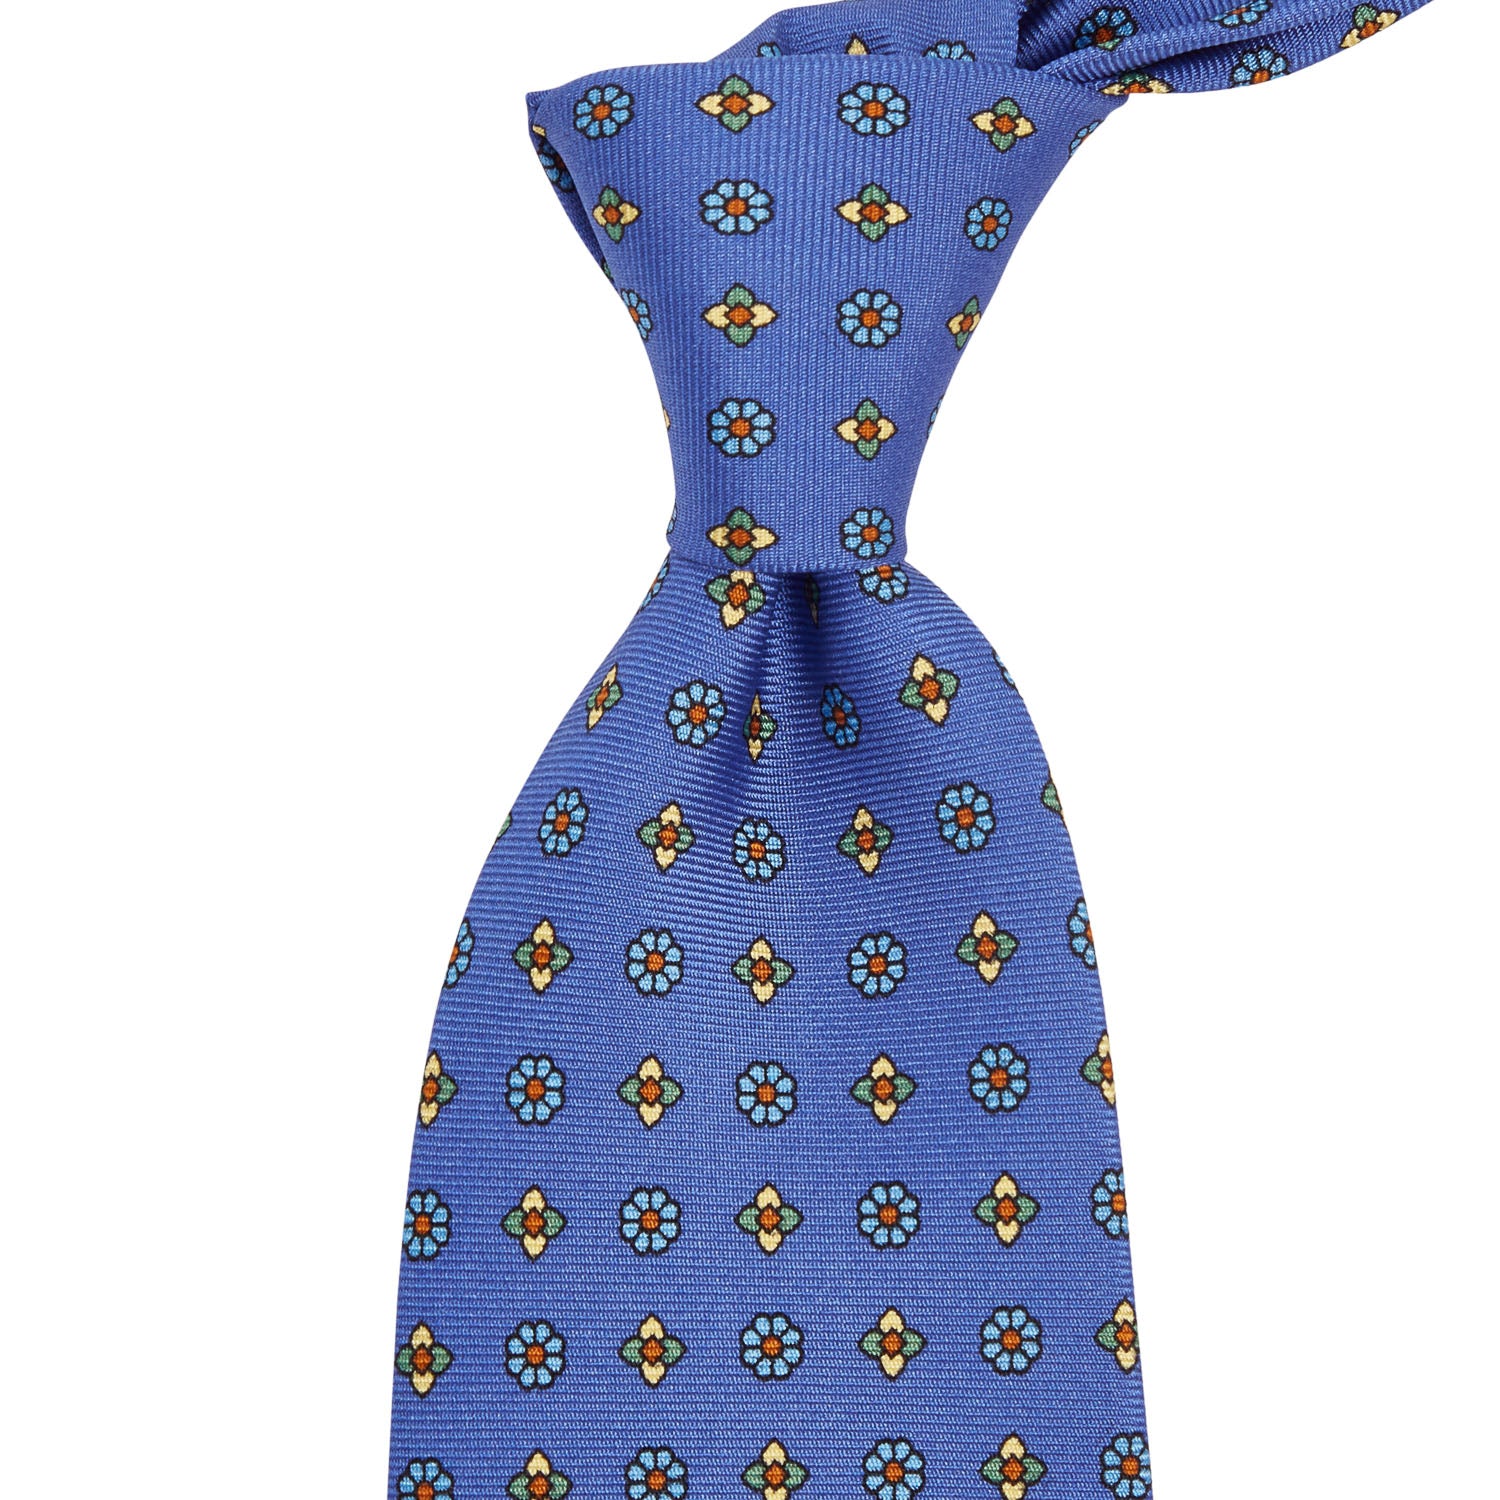 A Sovereign Grade Lido Blue Floral Printed Silk Tie, made of 100% English silk, from KirbyAllison.com.